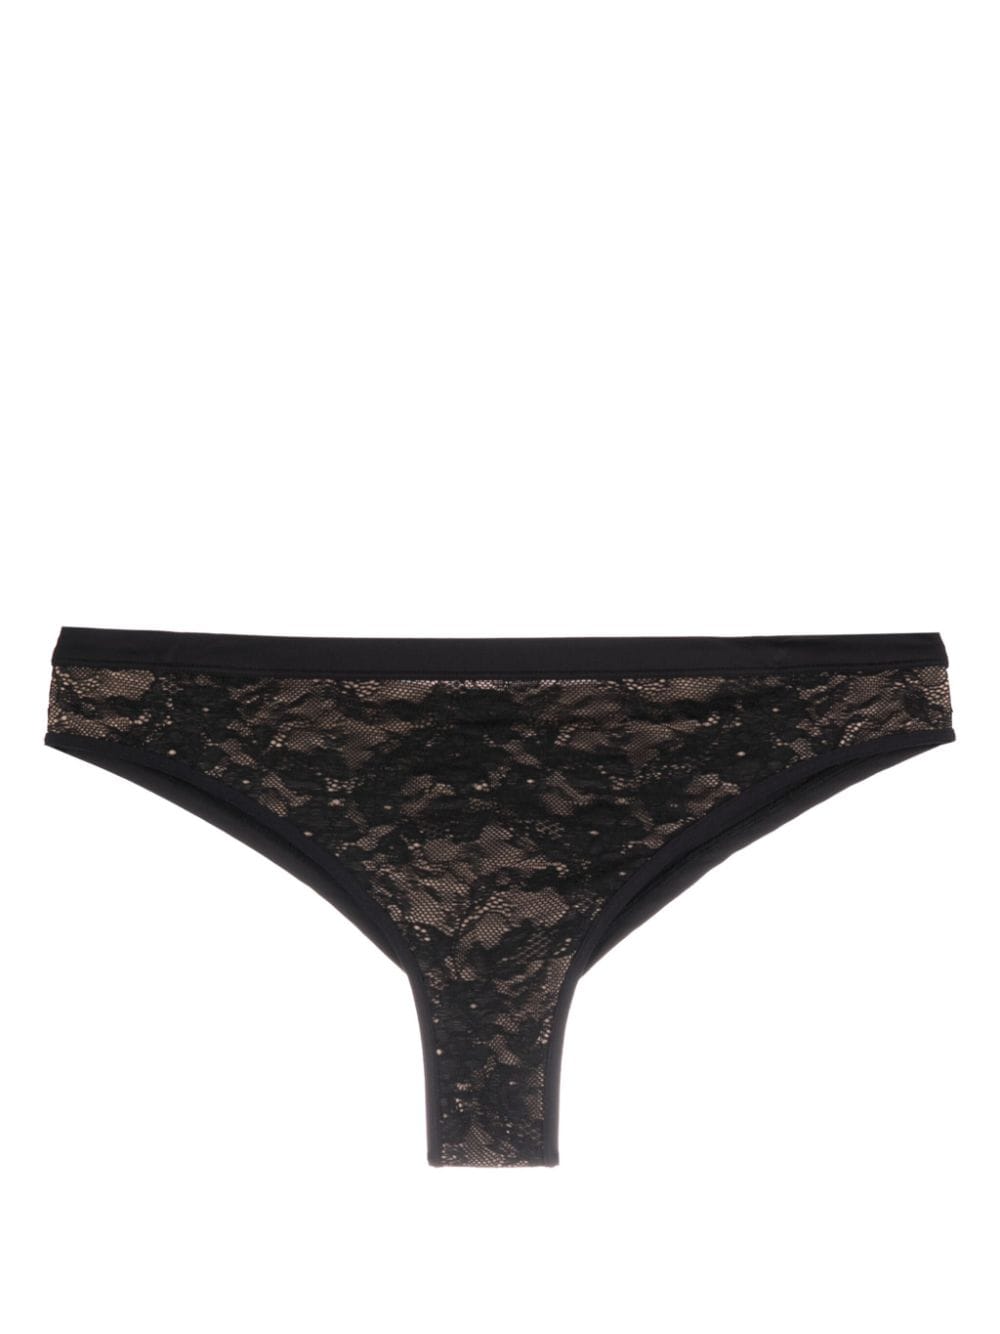 Taboo floral-lace butterfly briefs